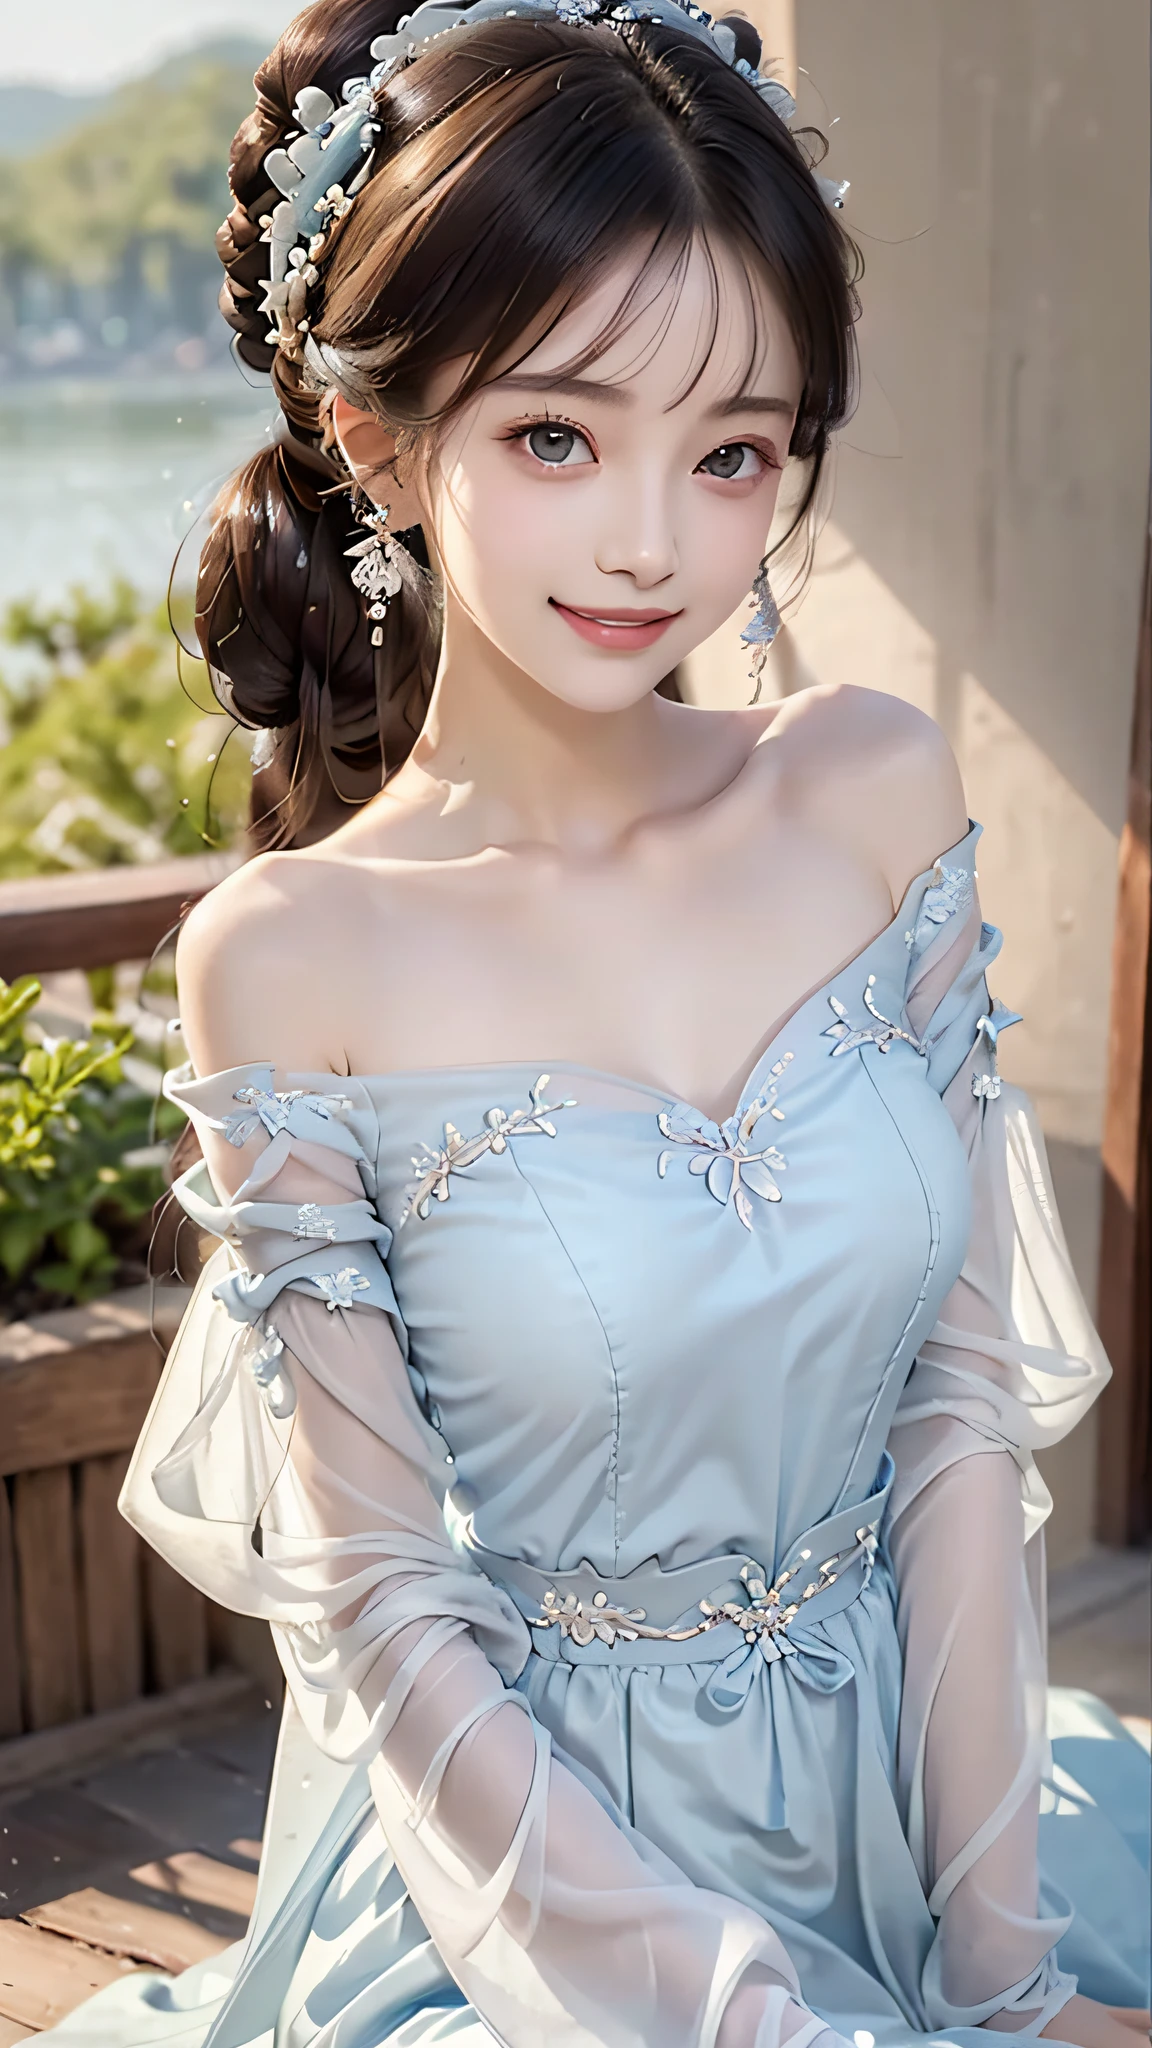 Ancient wind，high detal，8K resolution，Ultra-high resolution，The best picture quality beautiful girl，Peerless beauty，Extremely beautiful（（Bamboo shoot-shaped chest，Huge_flourishing）），（Chinese style ancient style black flowing hair with exquisite buns），（Long flowing hair，With a bun:1.3）），With bangs，Delicate collarbones，beautiful make up，Exquisite and perfect facial features，Big watery eyes，Lying silkworm，Long eyelashes，The eyes are sweet and have eye shadow，Slim waist，(((With a sweet smile on your face:1.3)))，lipsticks，Blushlush，Delicate earring earrings，closeup of face，(Dressed in a high-necked translucent lake blue tulle fairy dress（Paired with delicate blue and white embroidery，With a shirt with large sleeves，Bare shoulders:1.3）)，Fresh and natural，Tranquil and beautiful，（Facing the viewer），Extreme picture quality，Highest accuracy，Close-up，forward leaning，dynamic angle，depth of fields。